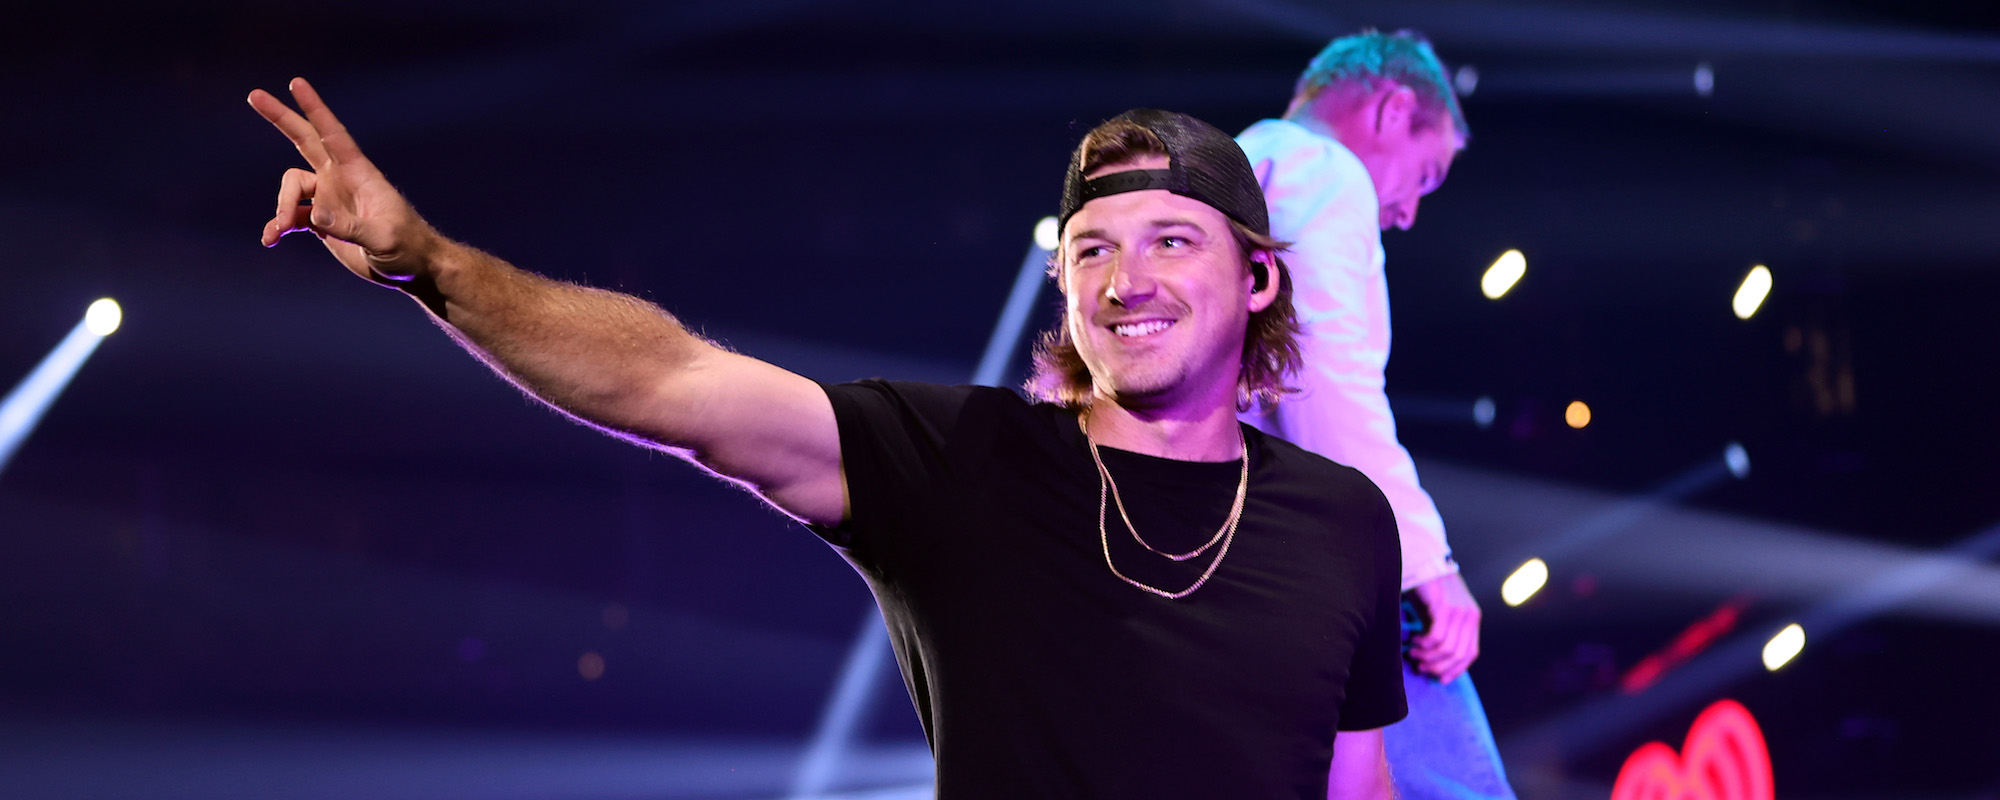 5 Times Morgan Wallen Dominated the Charts